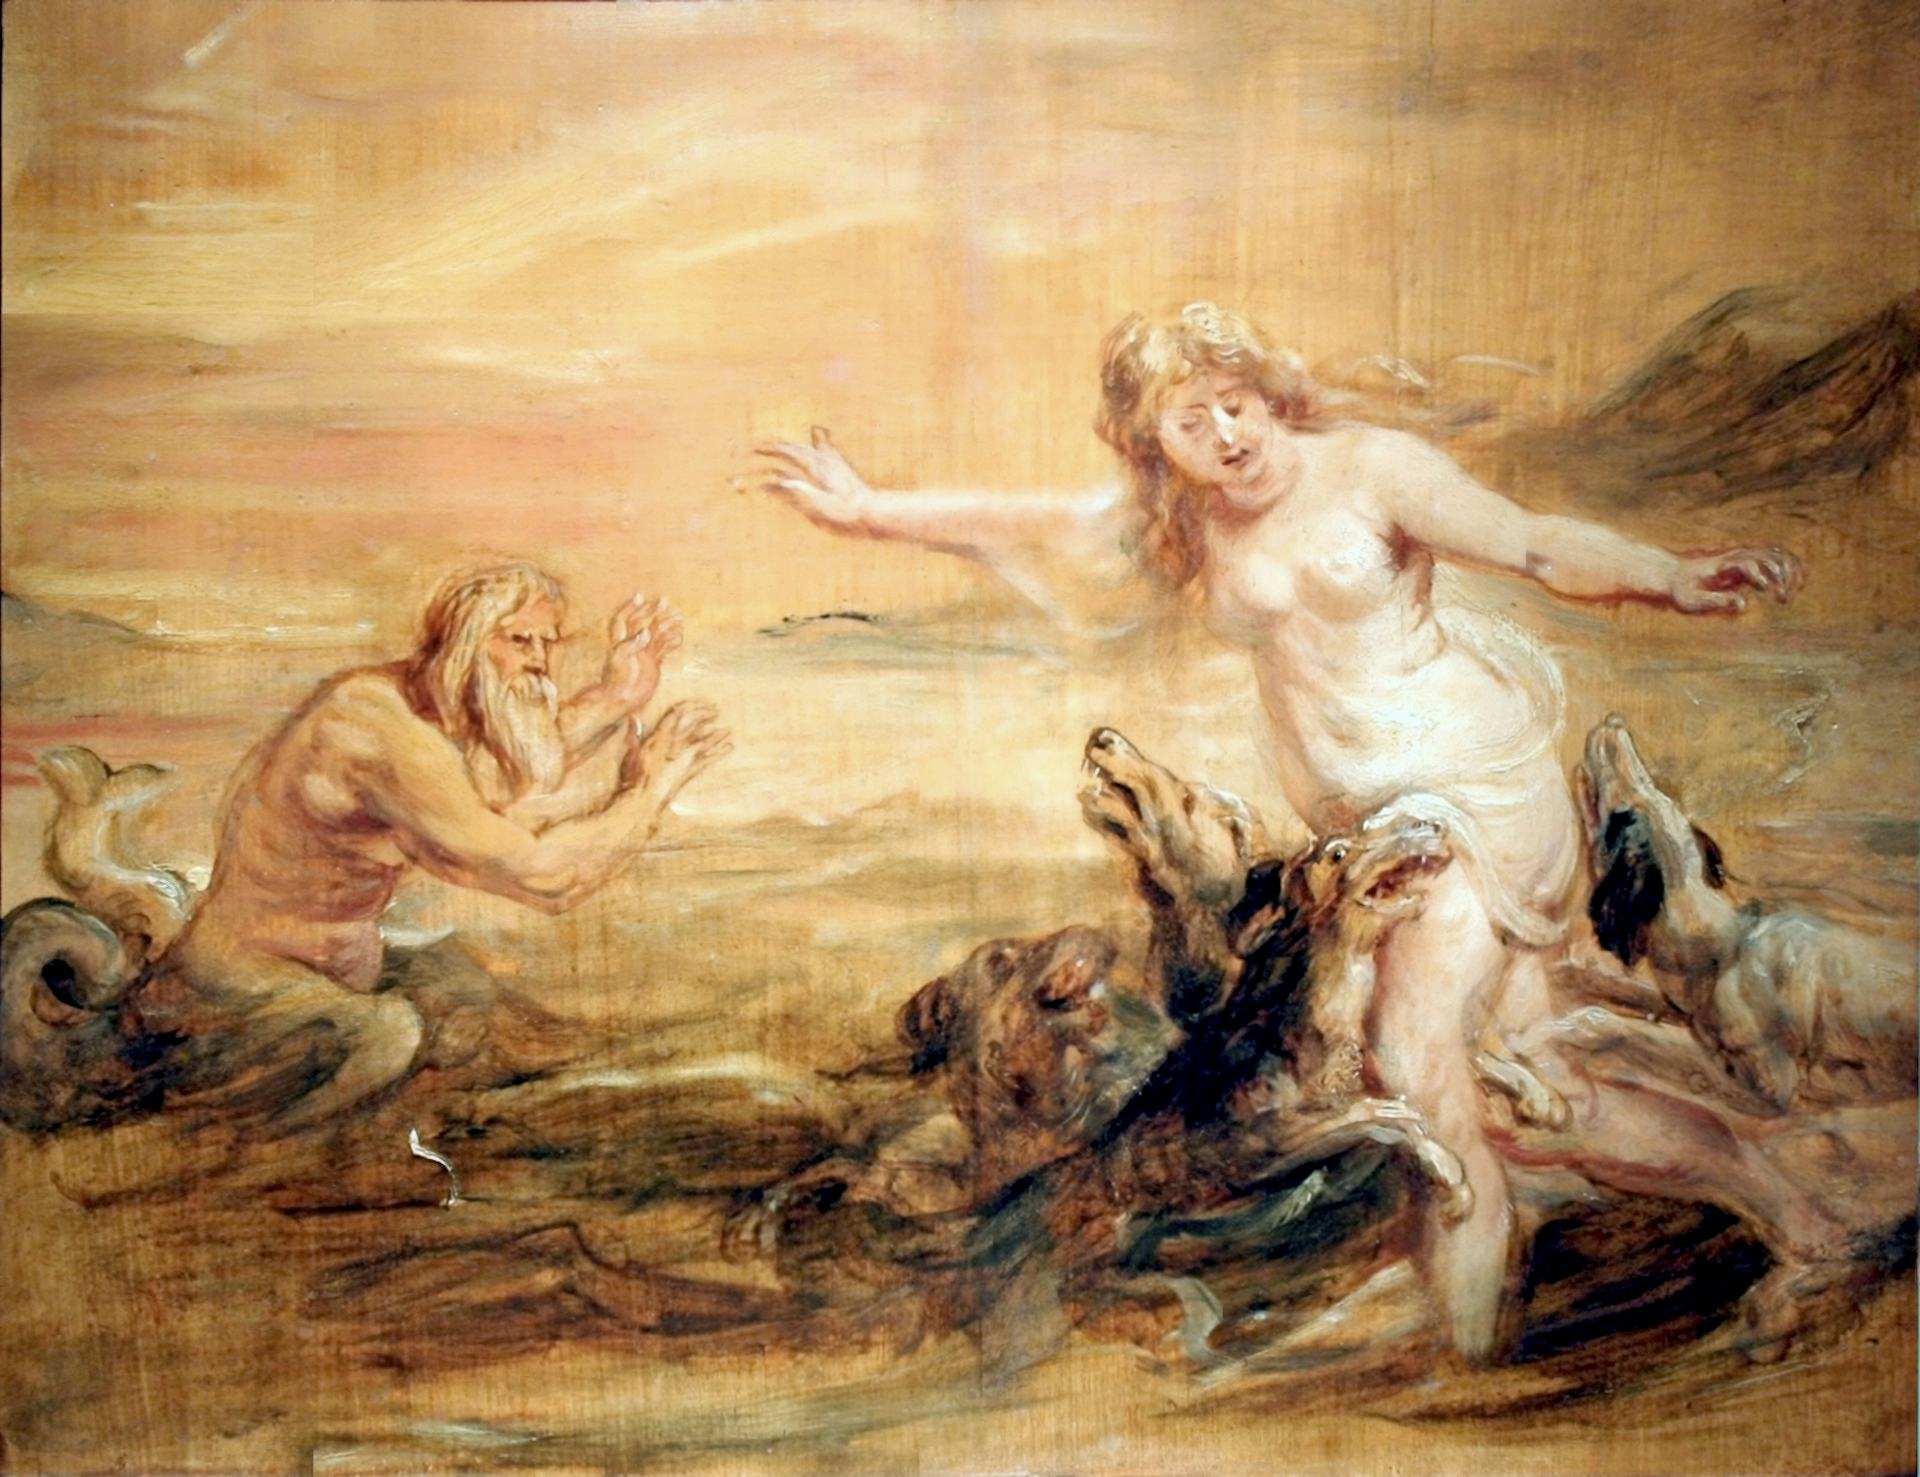 Scylla and Glaucus by Peter Paul Rubens (ca. 1636)